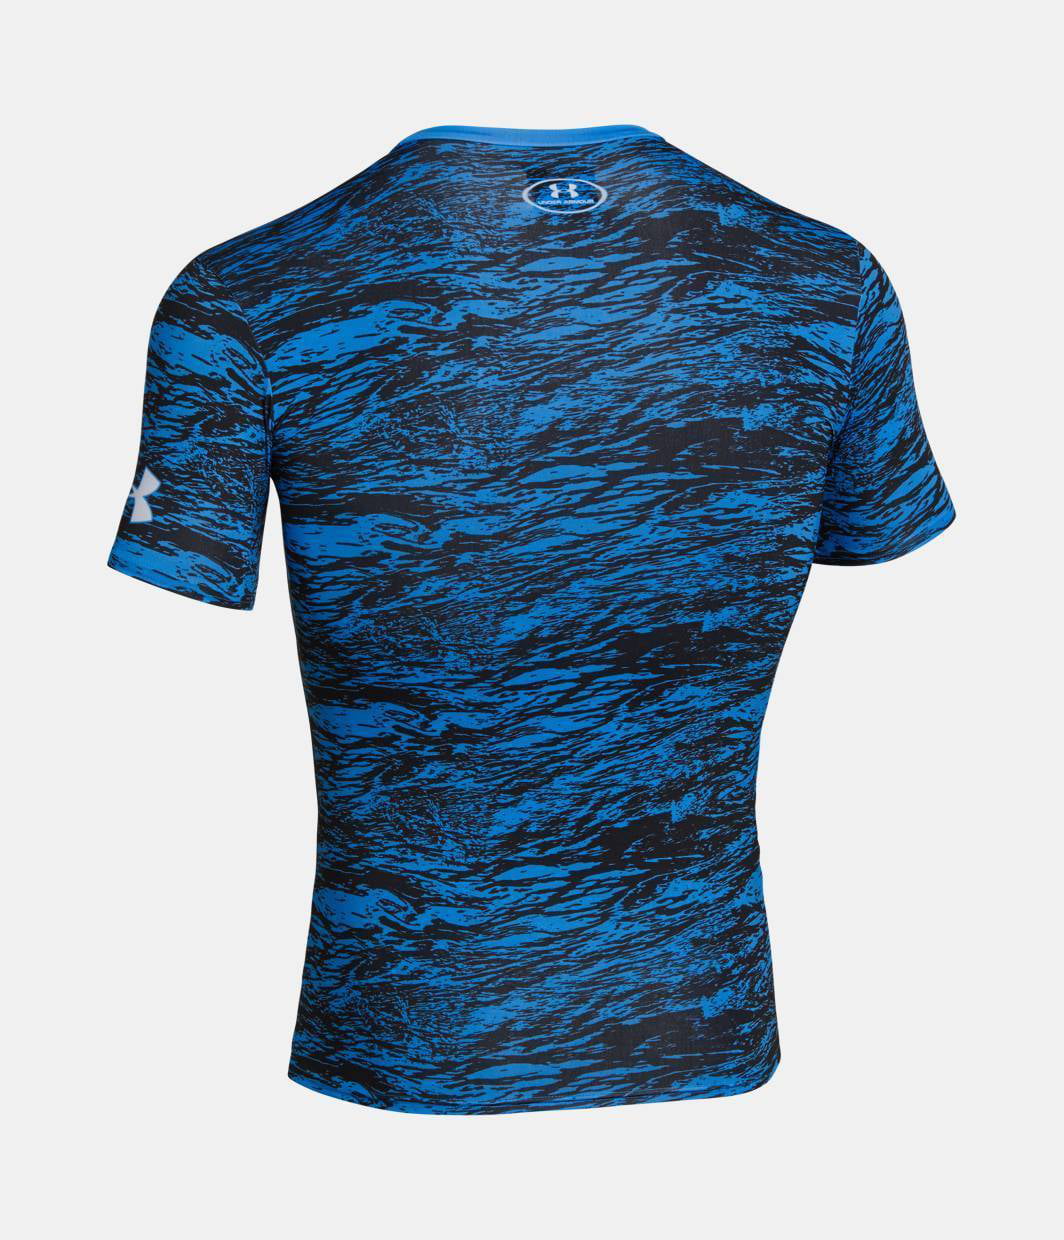 Under Armour Mens Alter Ego Compression Short-Sleeve T-Shirt